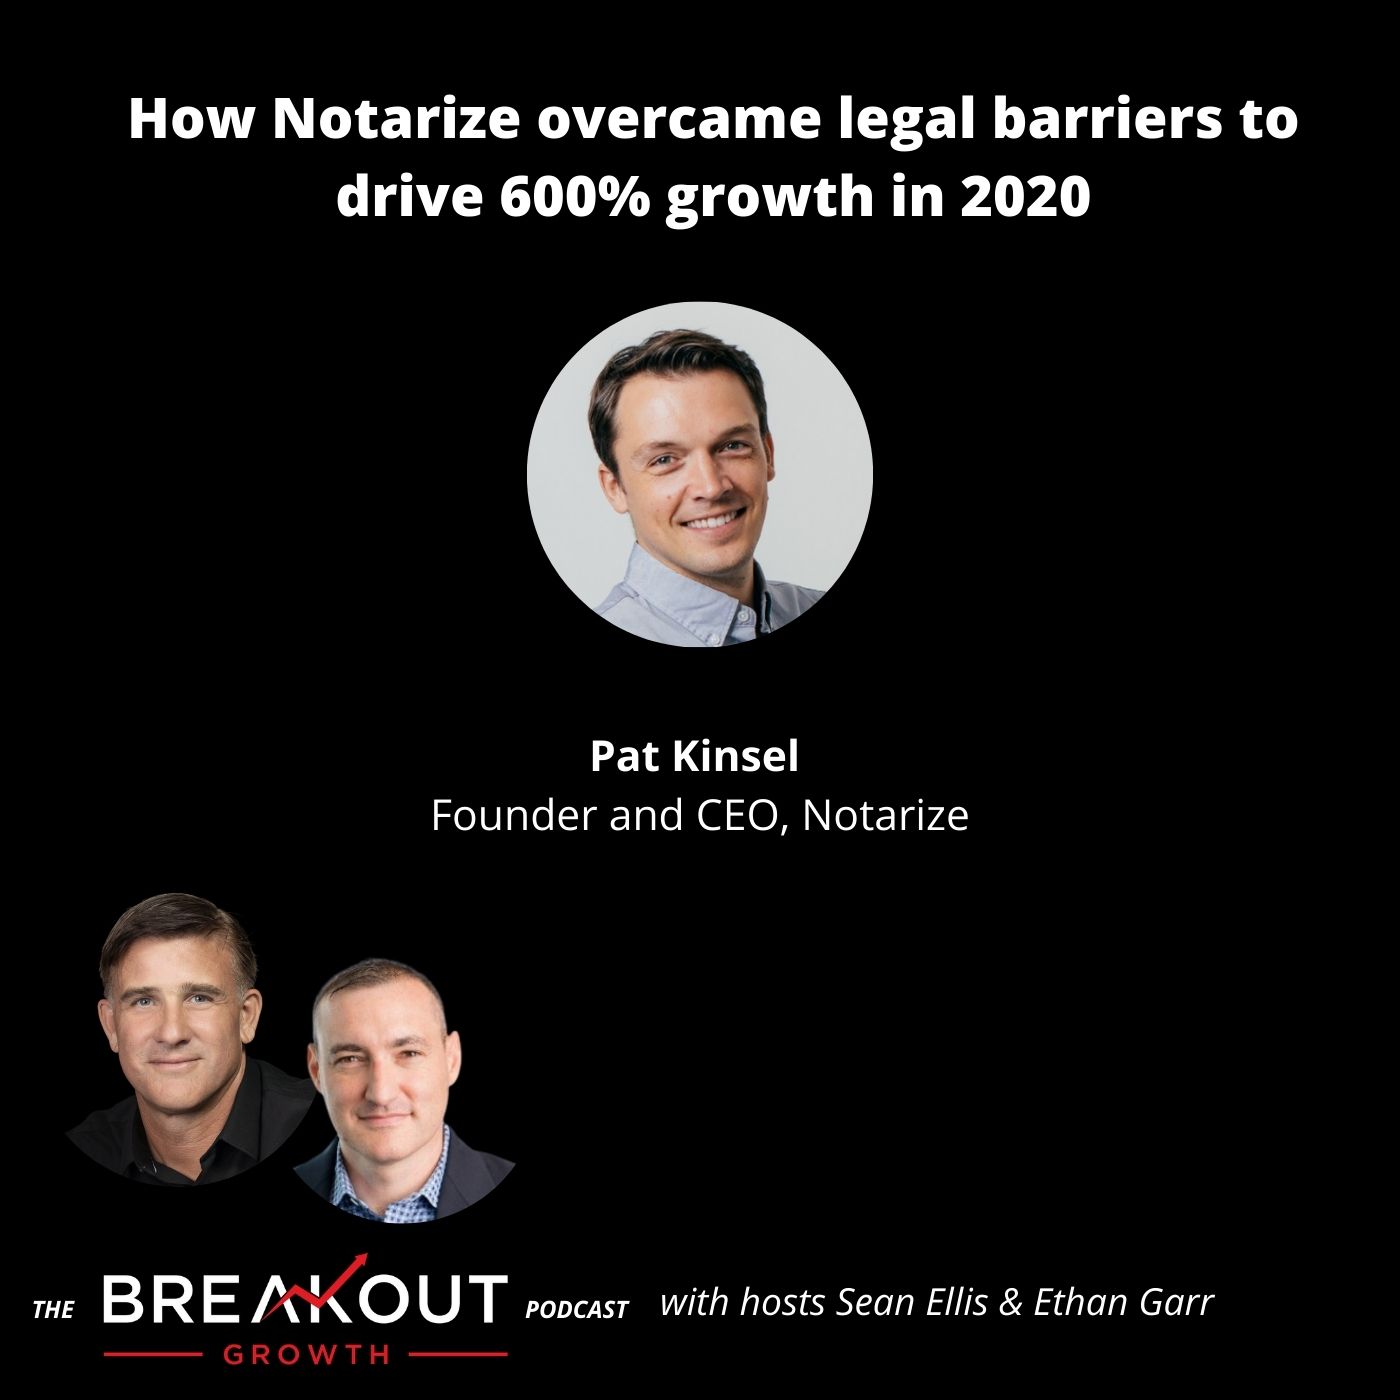 How Notarize overcame legal barriers to drive 600% growth in 2020